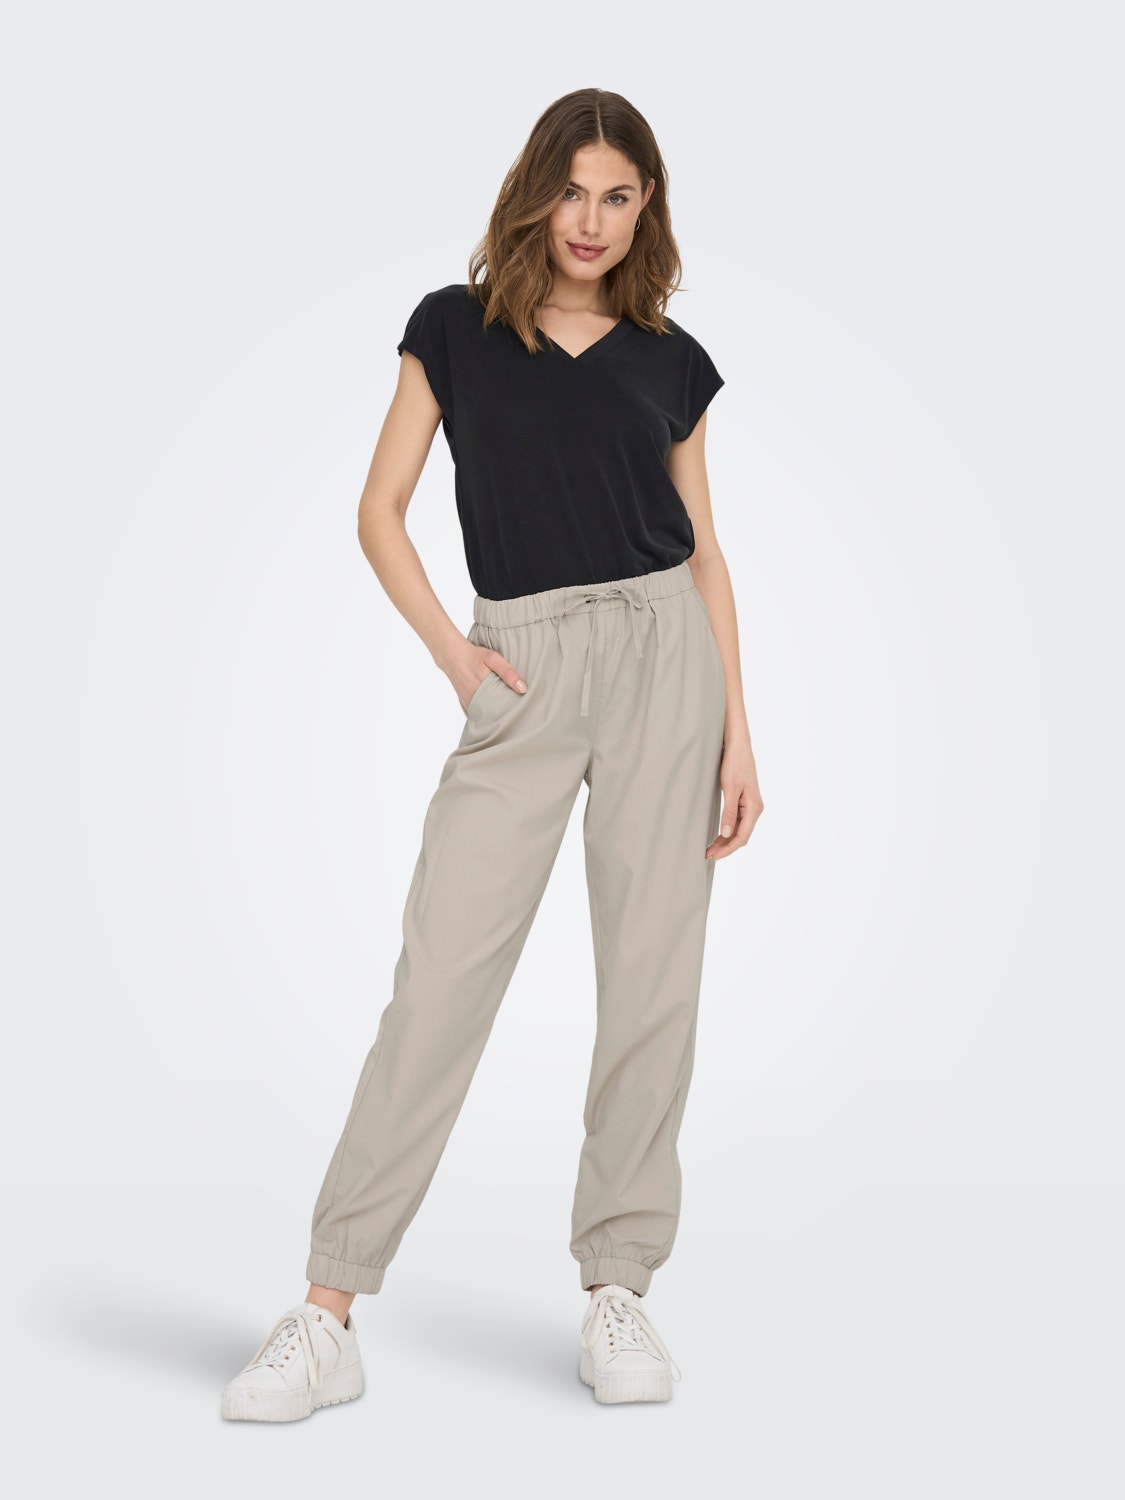 ONLY Loose Fit Mid waist Elasticated hems Track Pants -Silver Lining - 15284001